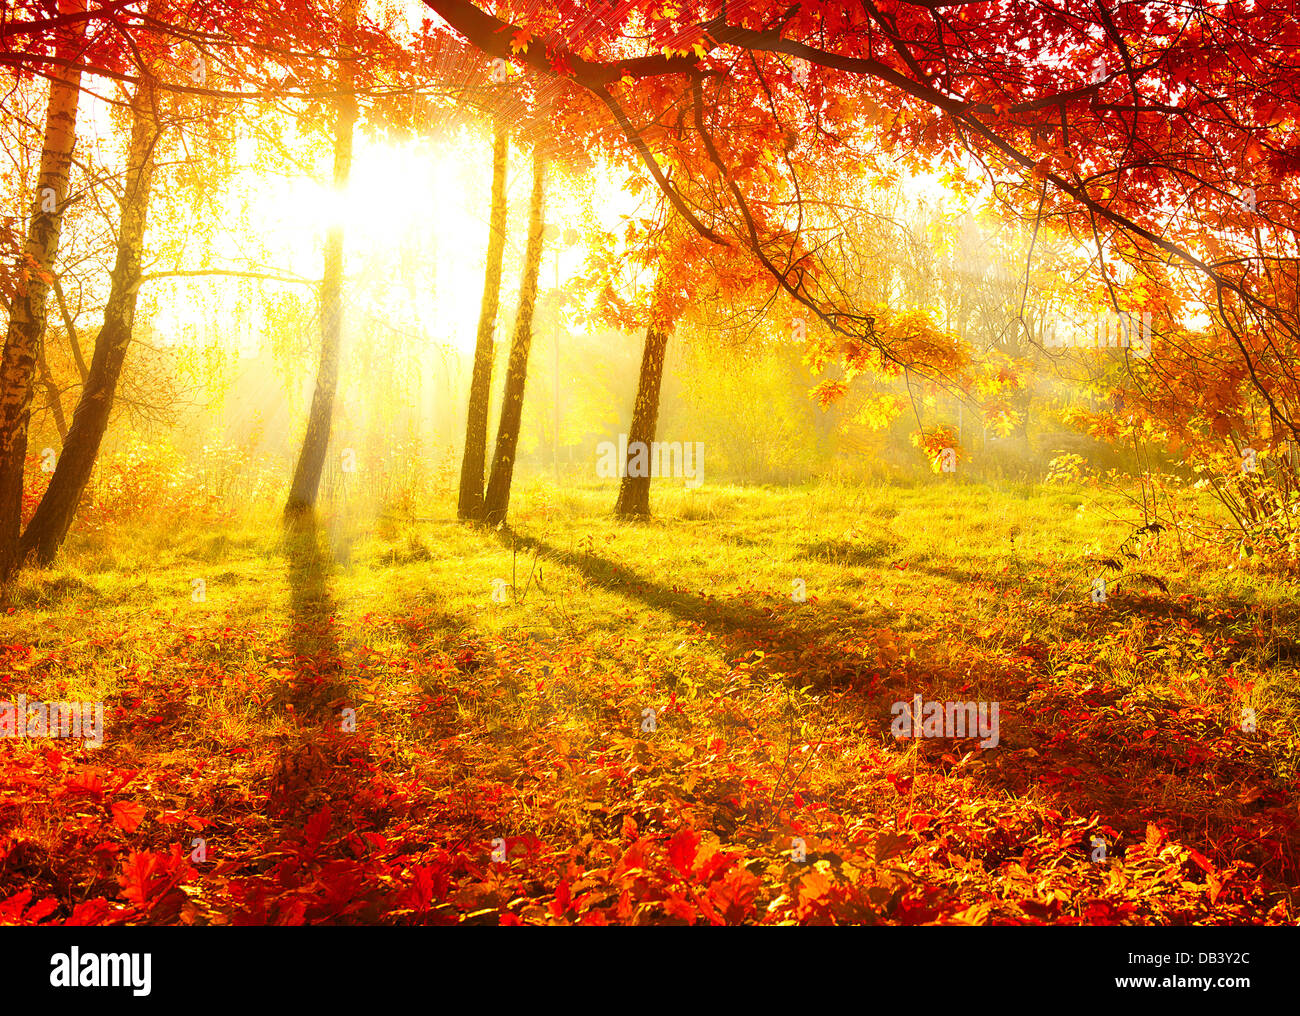 Autumnal Park. Autumn Trees and Leaves. Fall Stock Photo